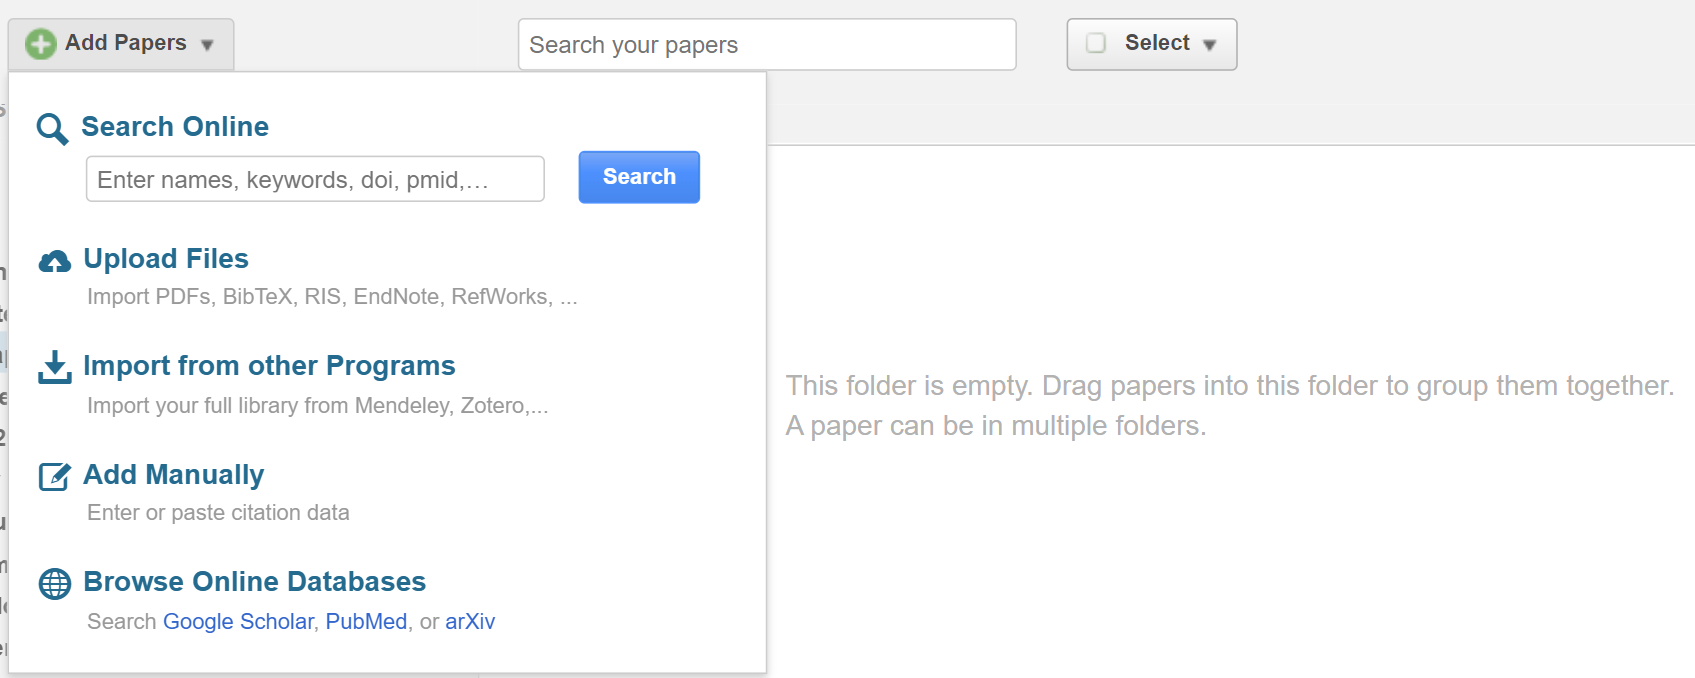 Add references to your new folder by uploading PDFs.